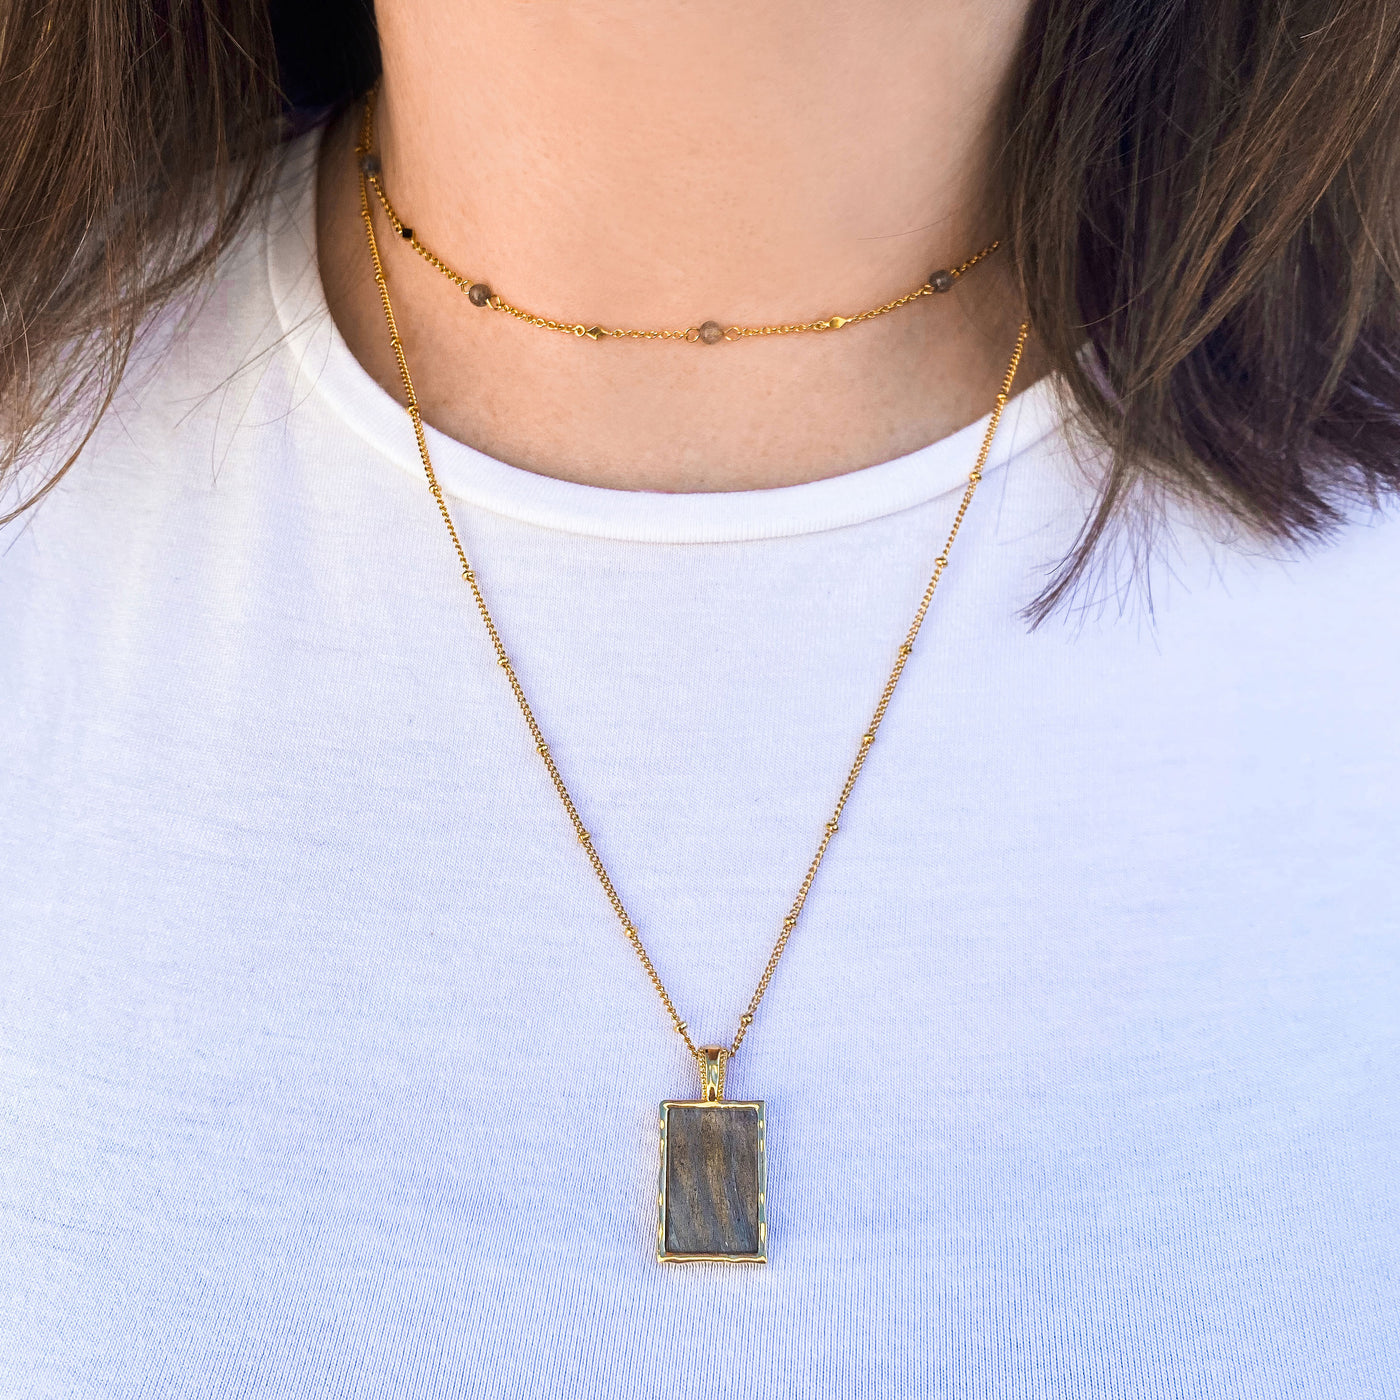 Gold layered necklaces with labradorite choker and labradorite rectangle pendant on bobble chain